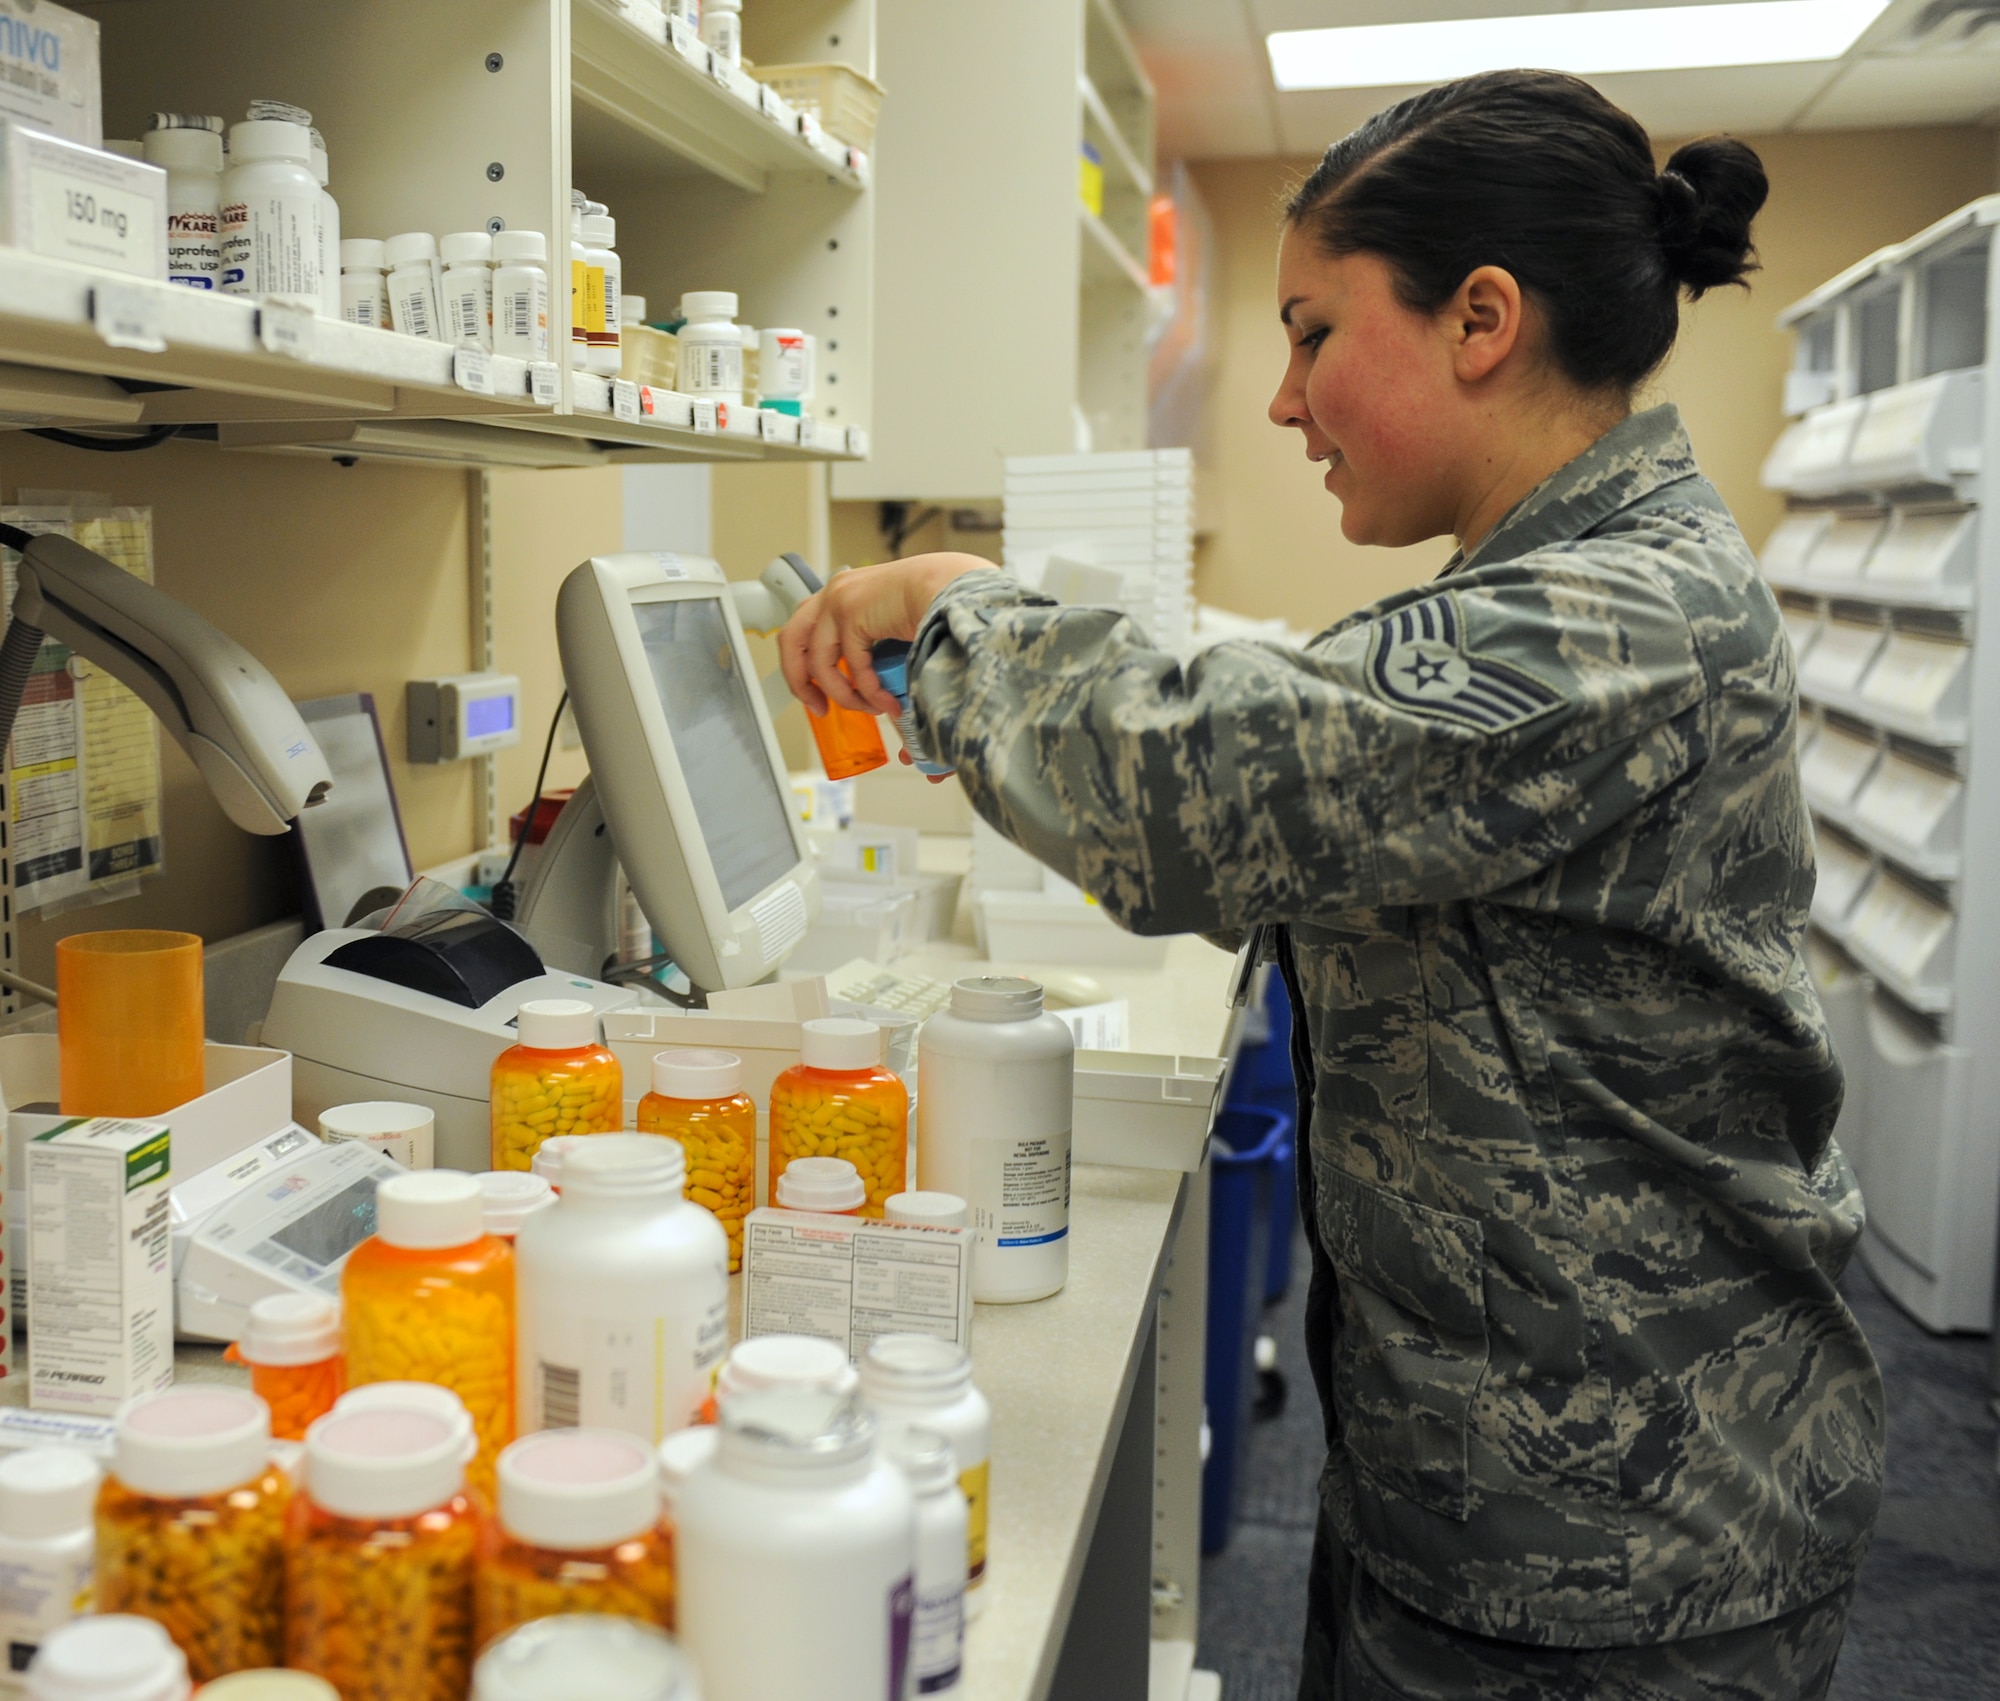 Staff Sgt. Natalia Currier, the 19th Medical Group noncommissioned officer in charge of the refill pharmacy, refills prescriptions called in by patients Feb. 24, 2014, at Little Rock Air Force Base, Ark. The refill pharmacy fills more than 300 prescriptions a day. (U.S. Air Force photo by Staff Sgt. Jessica Condit)